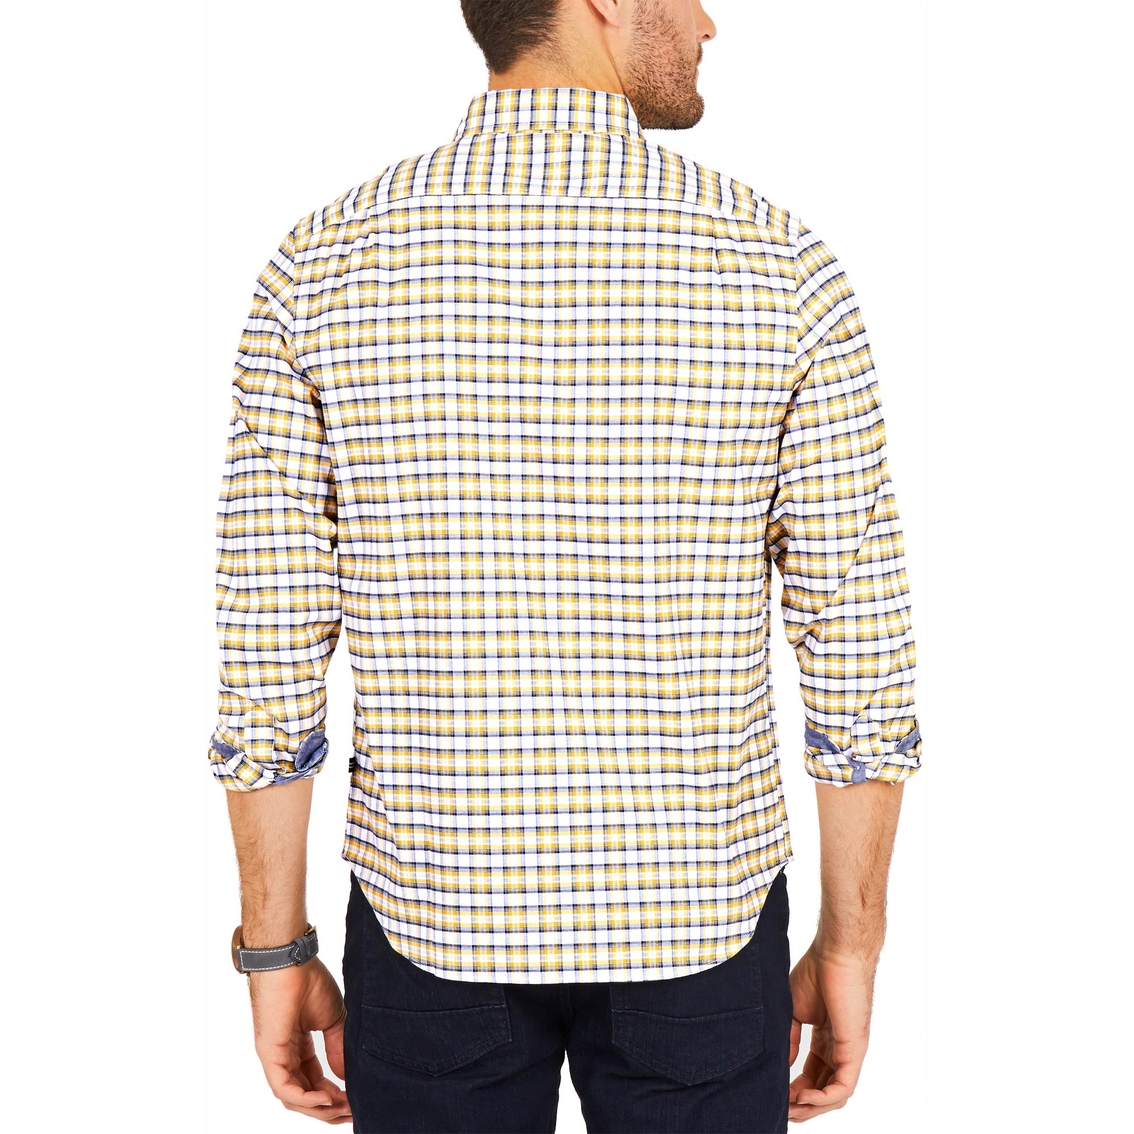 Nautica Classic Fit Oxford Shirt - Image 2 of 3